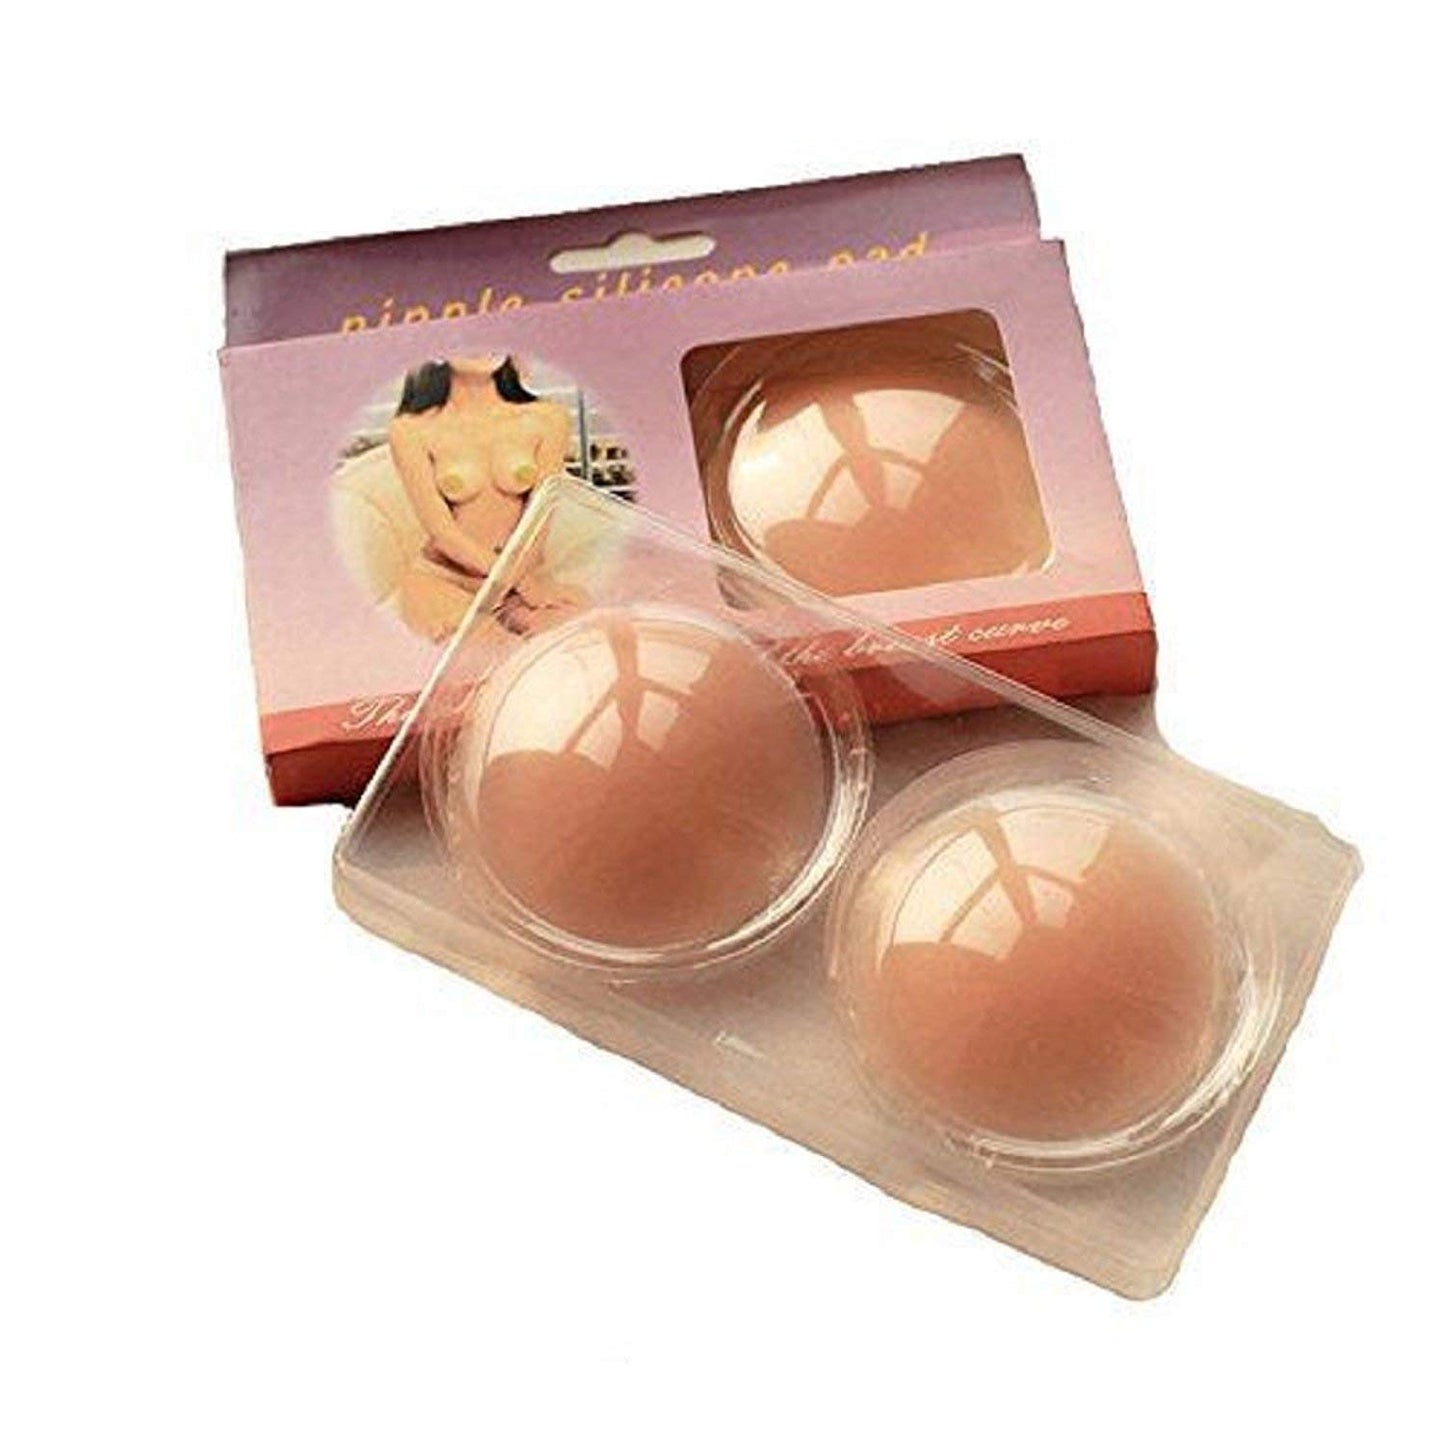 Importikaah-nipple-covers-designed-for-discreet-wear